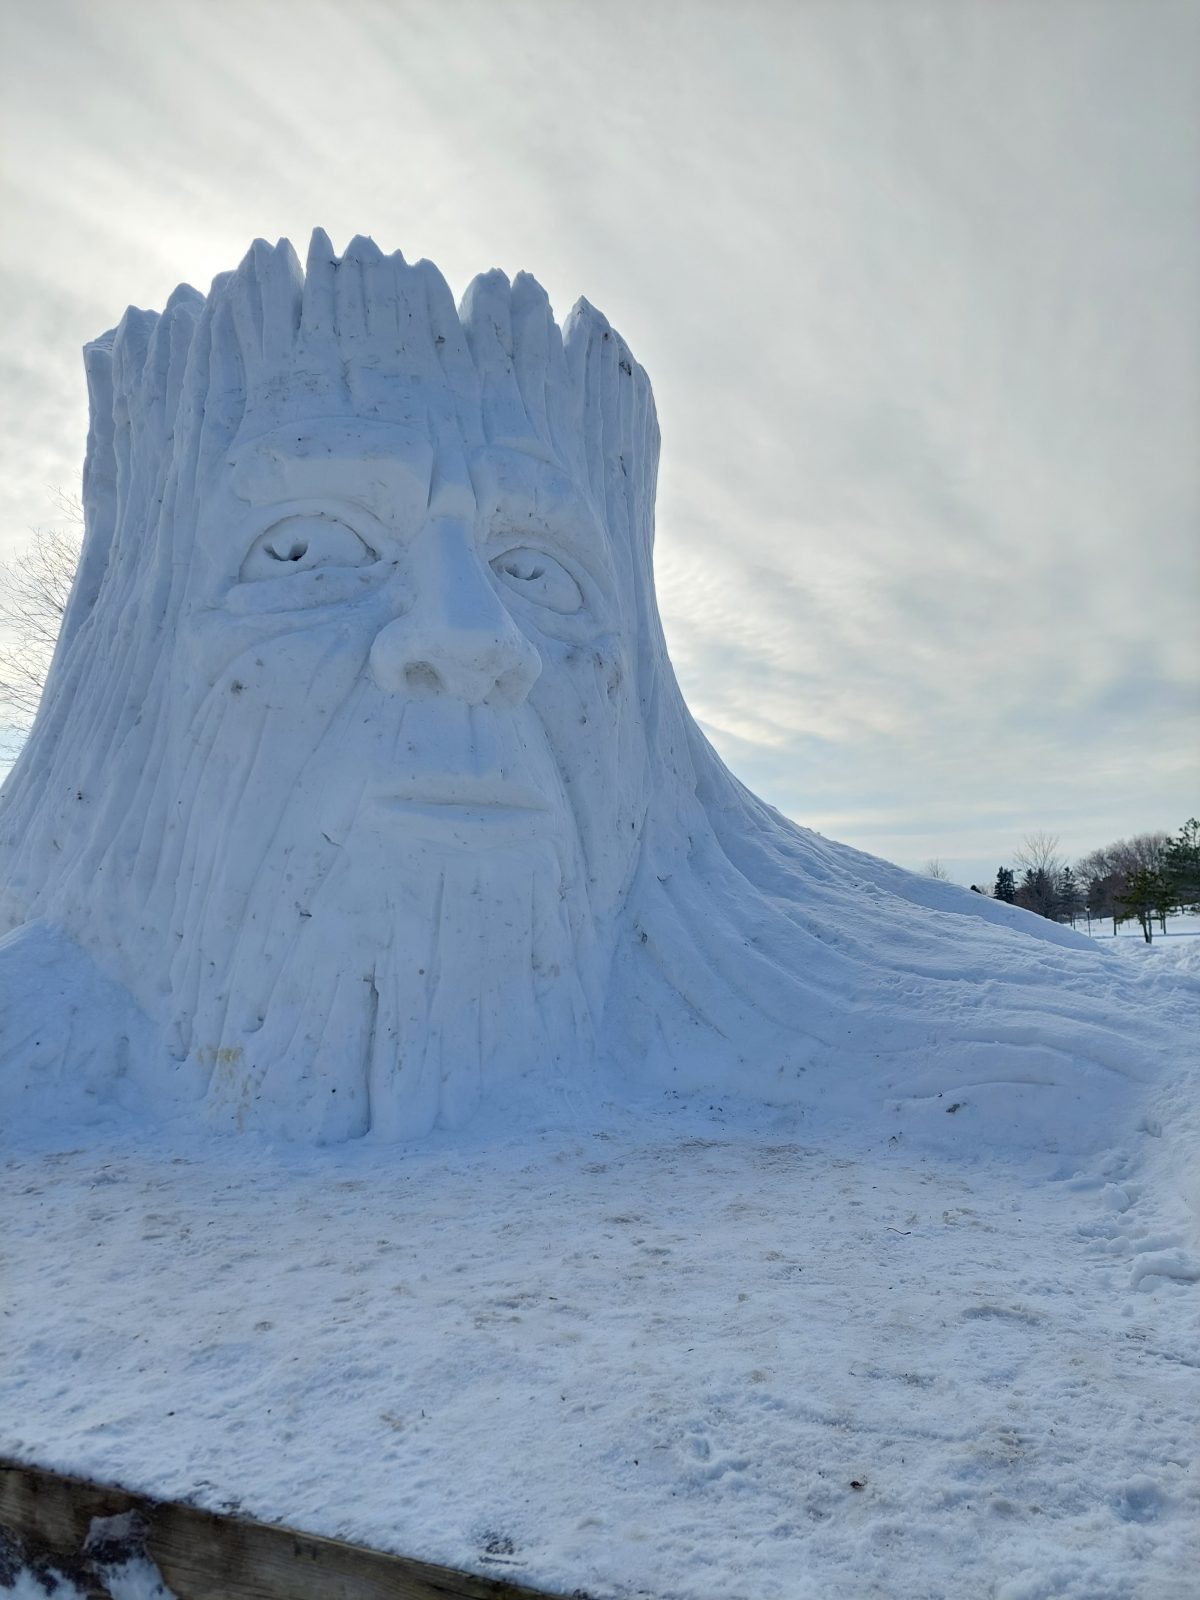 Giant snow sculpture takes root in Lamoureux Park